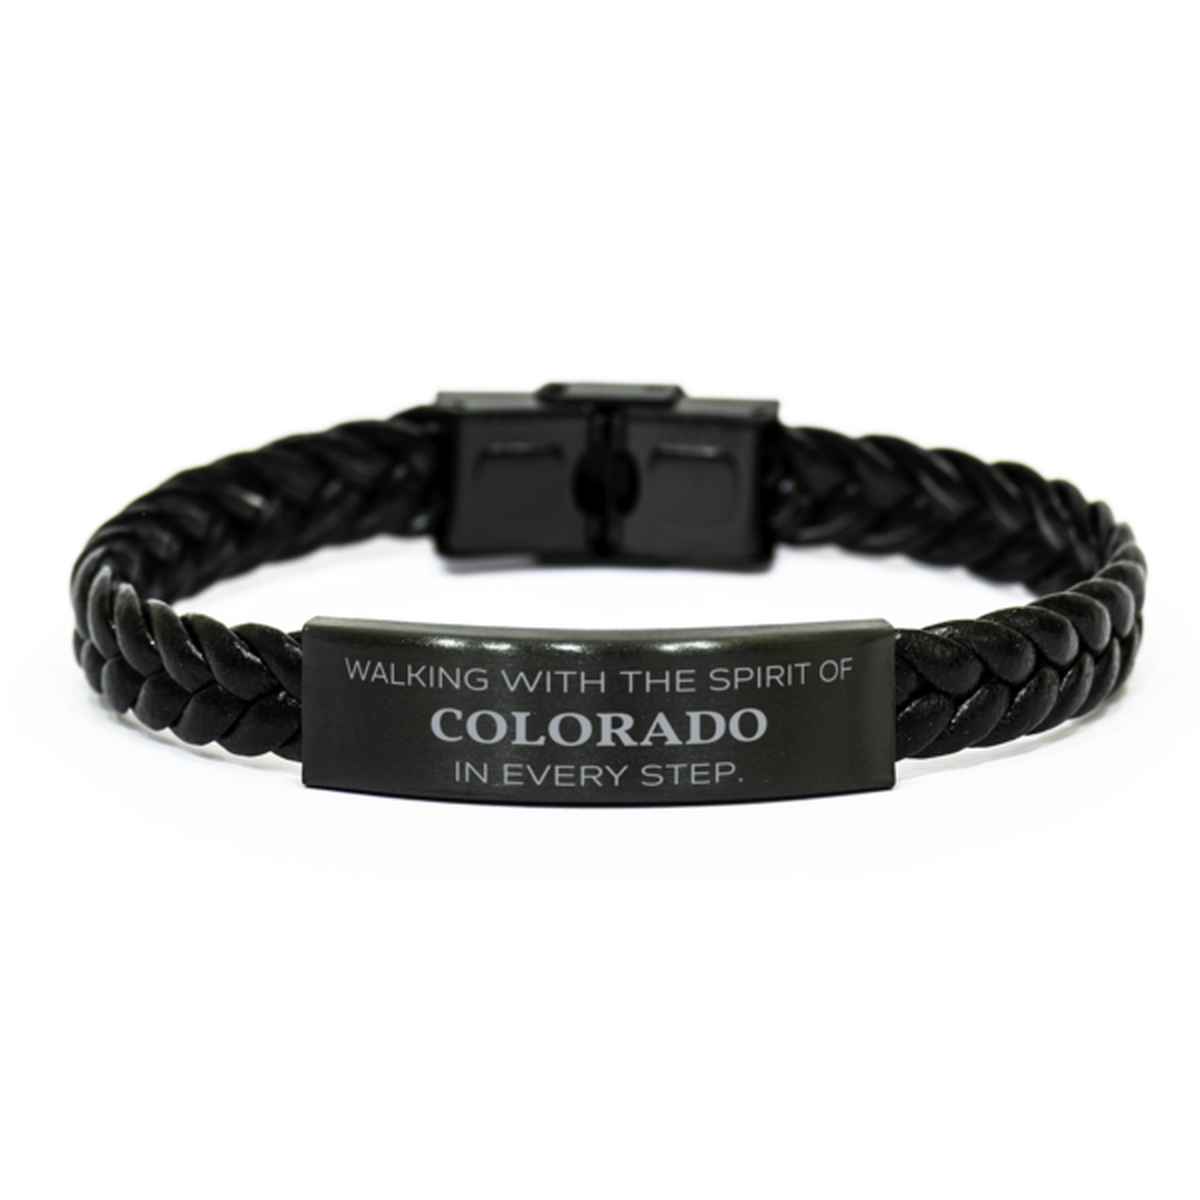 Colorado Gifts, Walking with the spirit, Love Colorado Birthday Christmas Braided Leather Bracelet For Colorado People, Men, Women, Friends